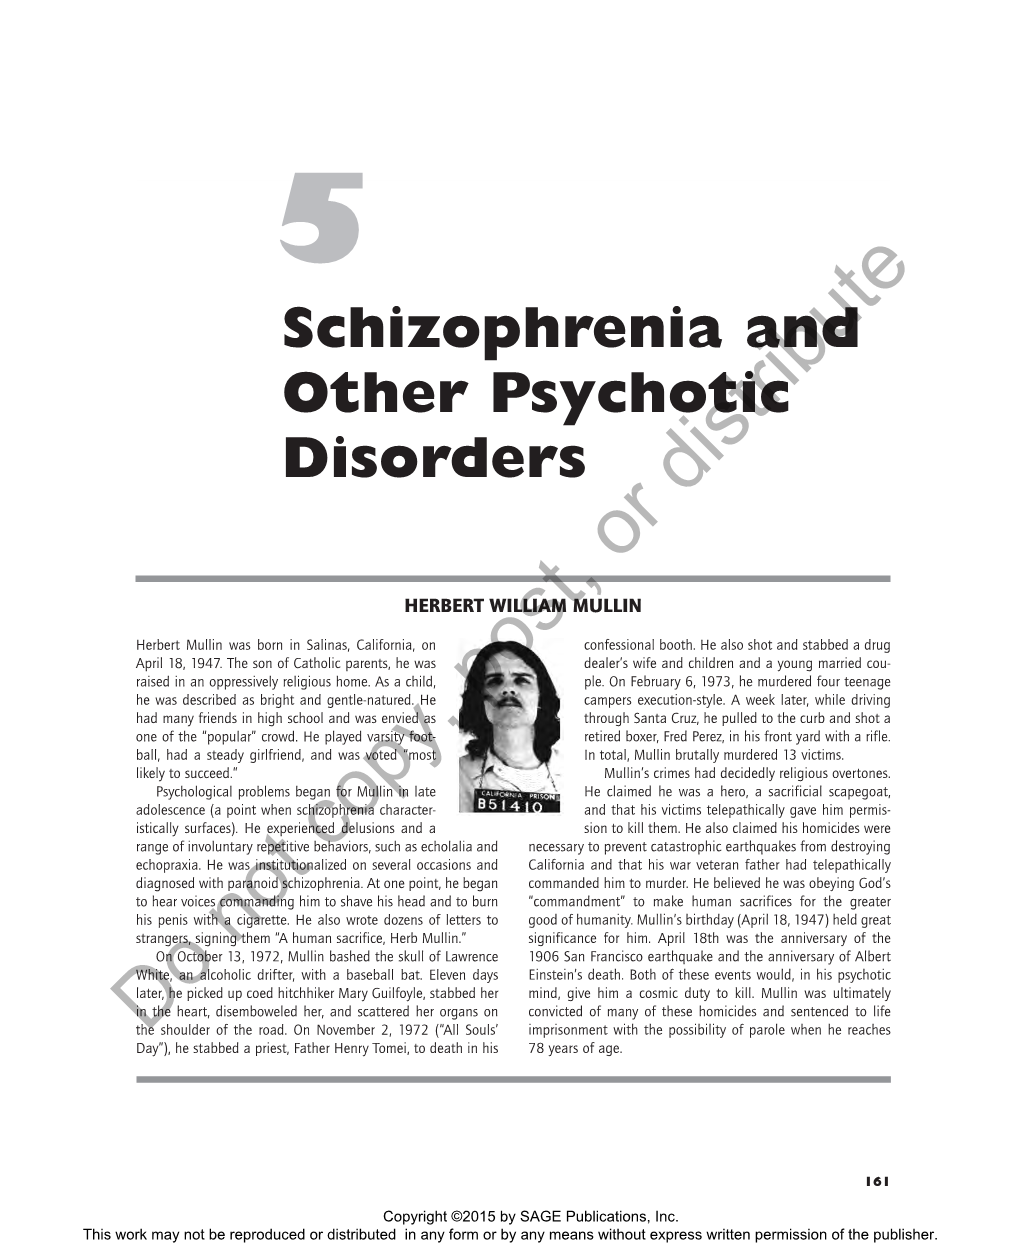 Schizophrenia and Other Psychotic Disorders Distribute Or HERBERT WILLIAM MULLIN